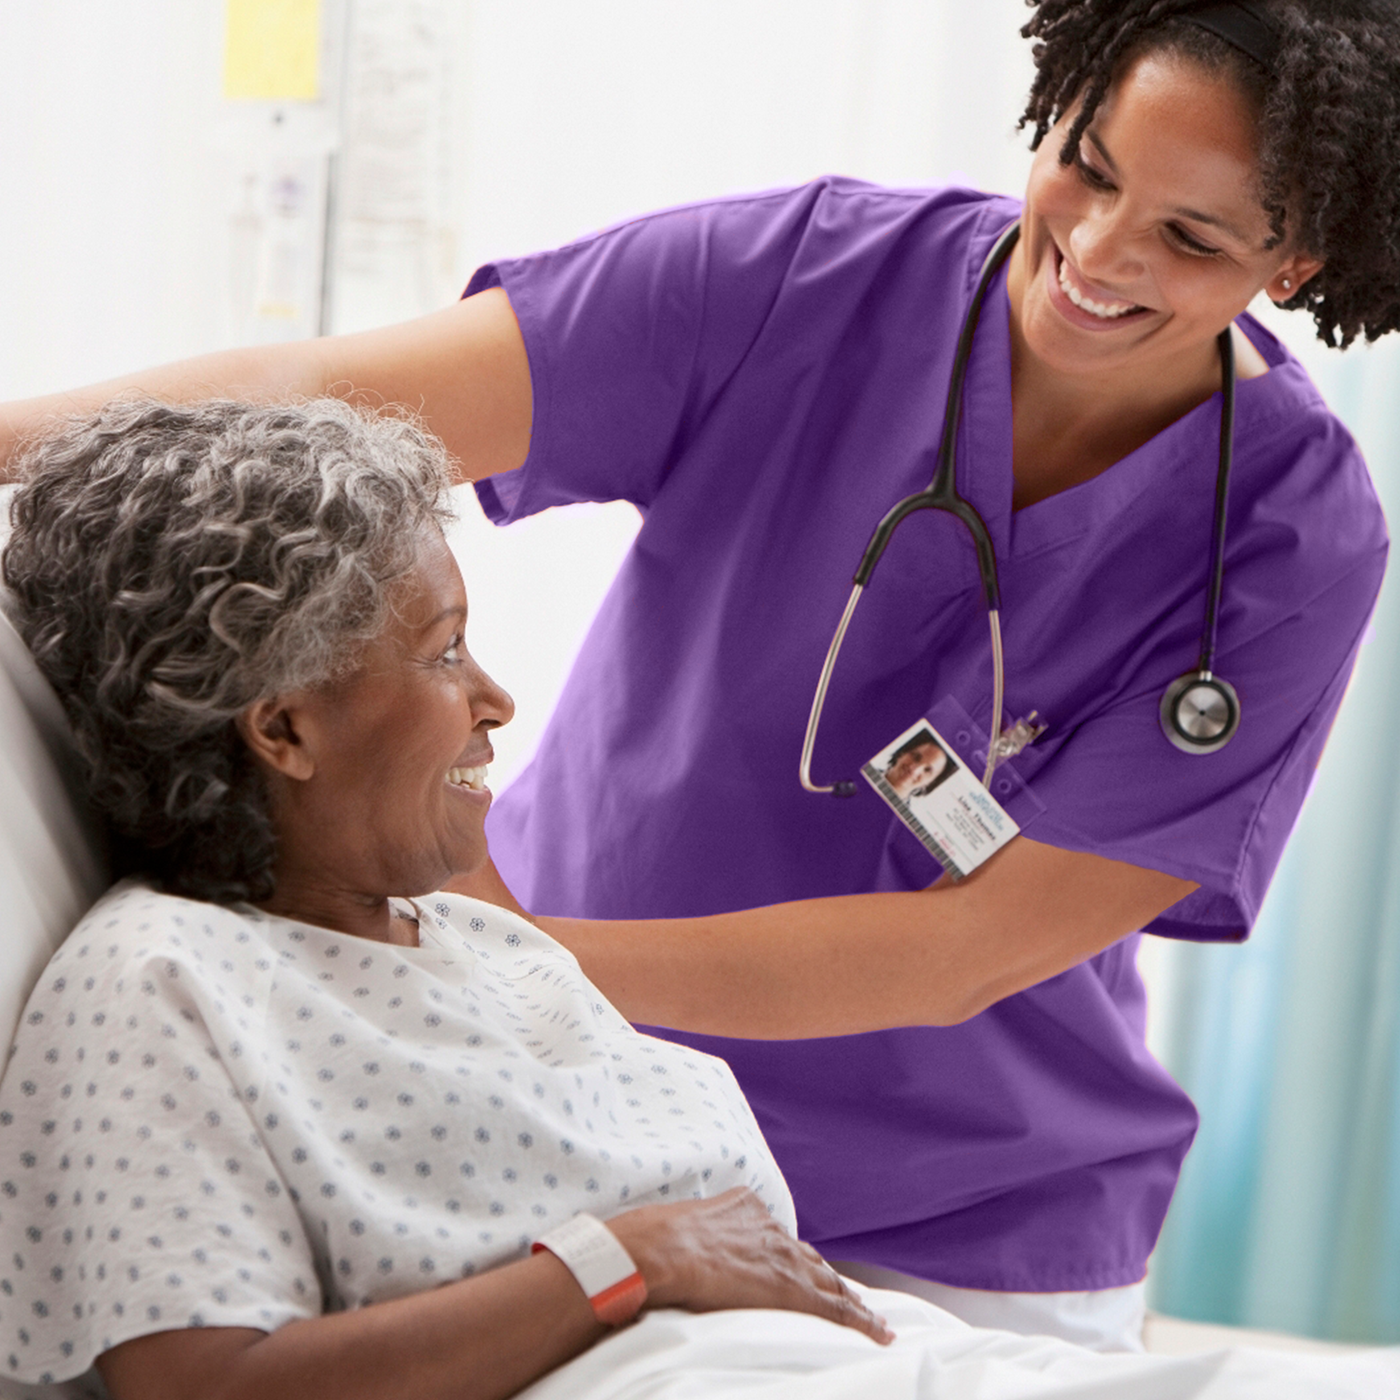 InSite Improve nurse and resident satisfaction by freeing nurses to spend more time with residents